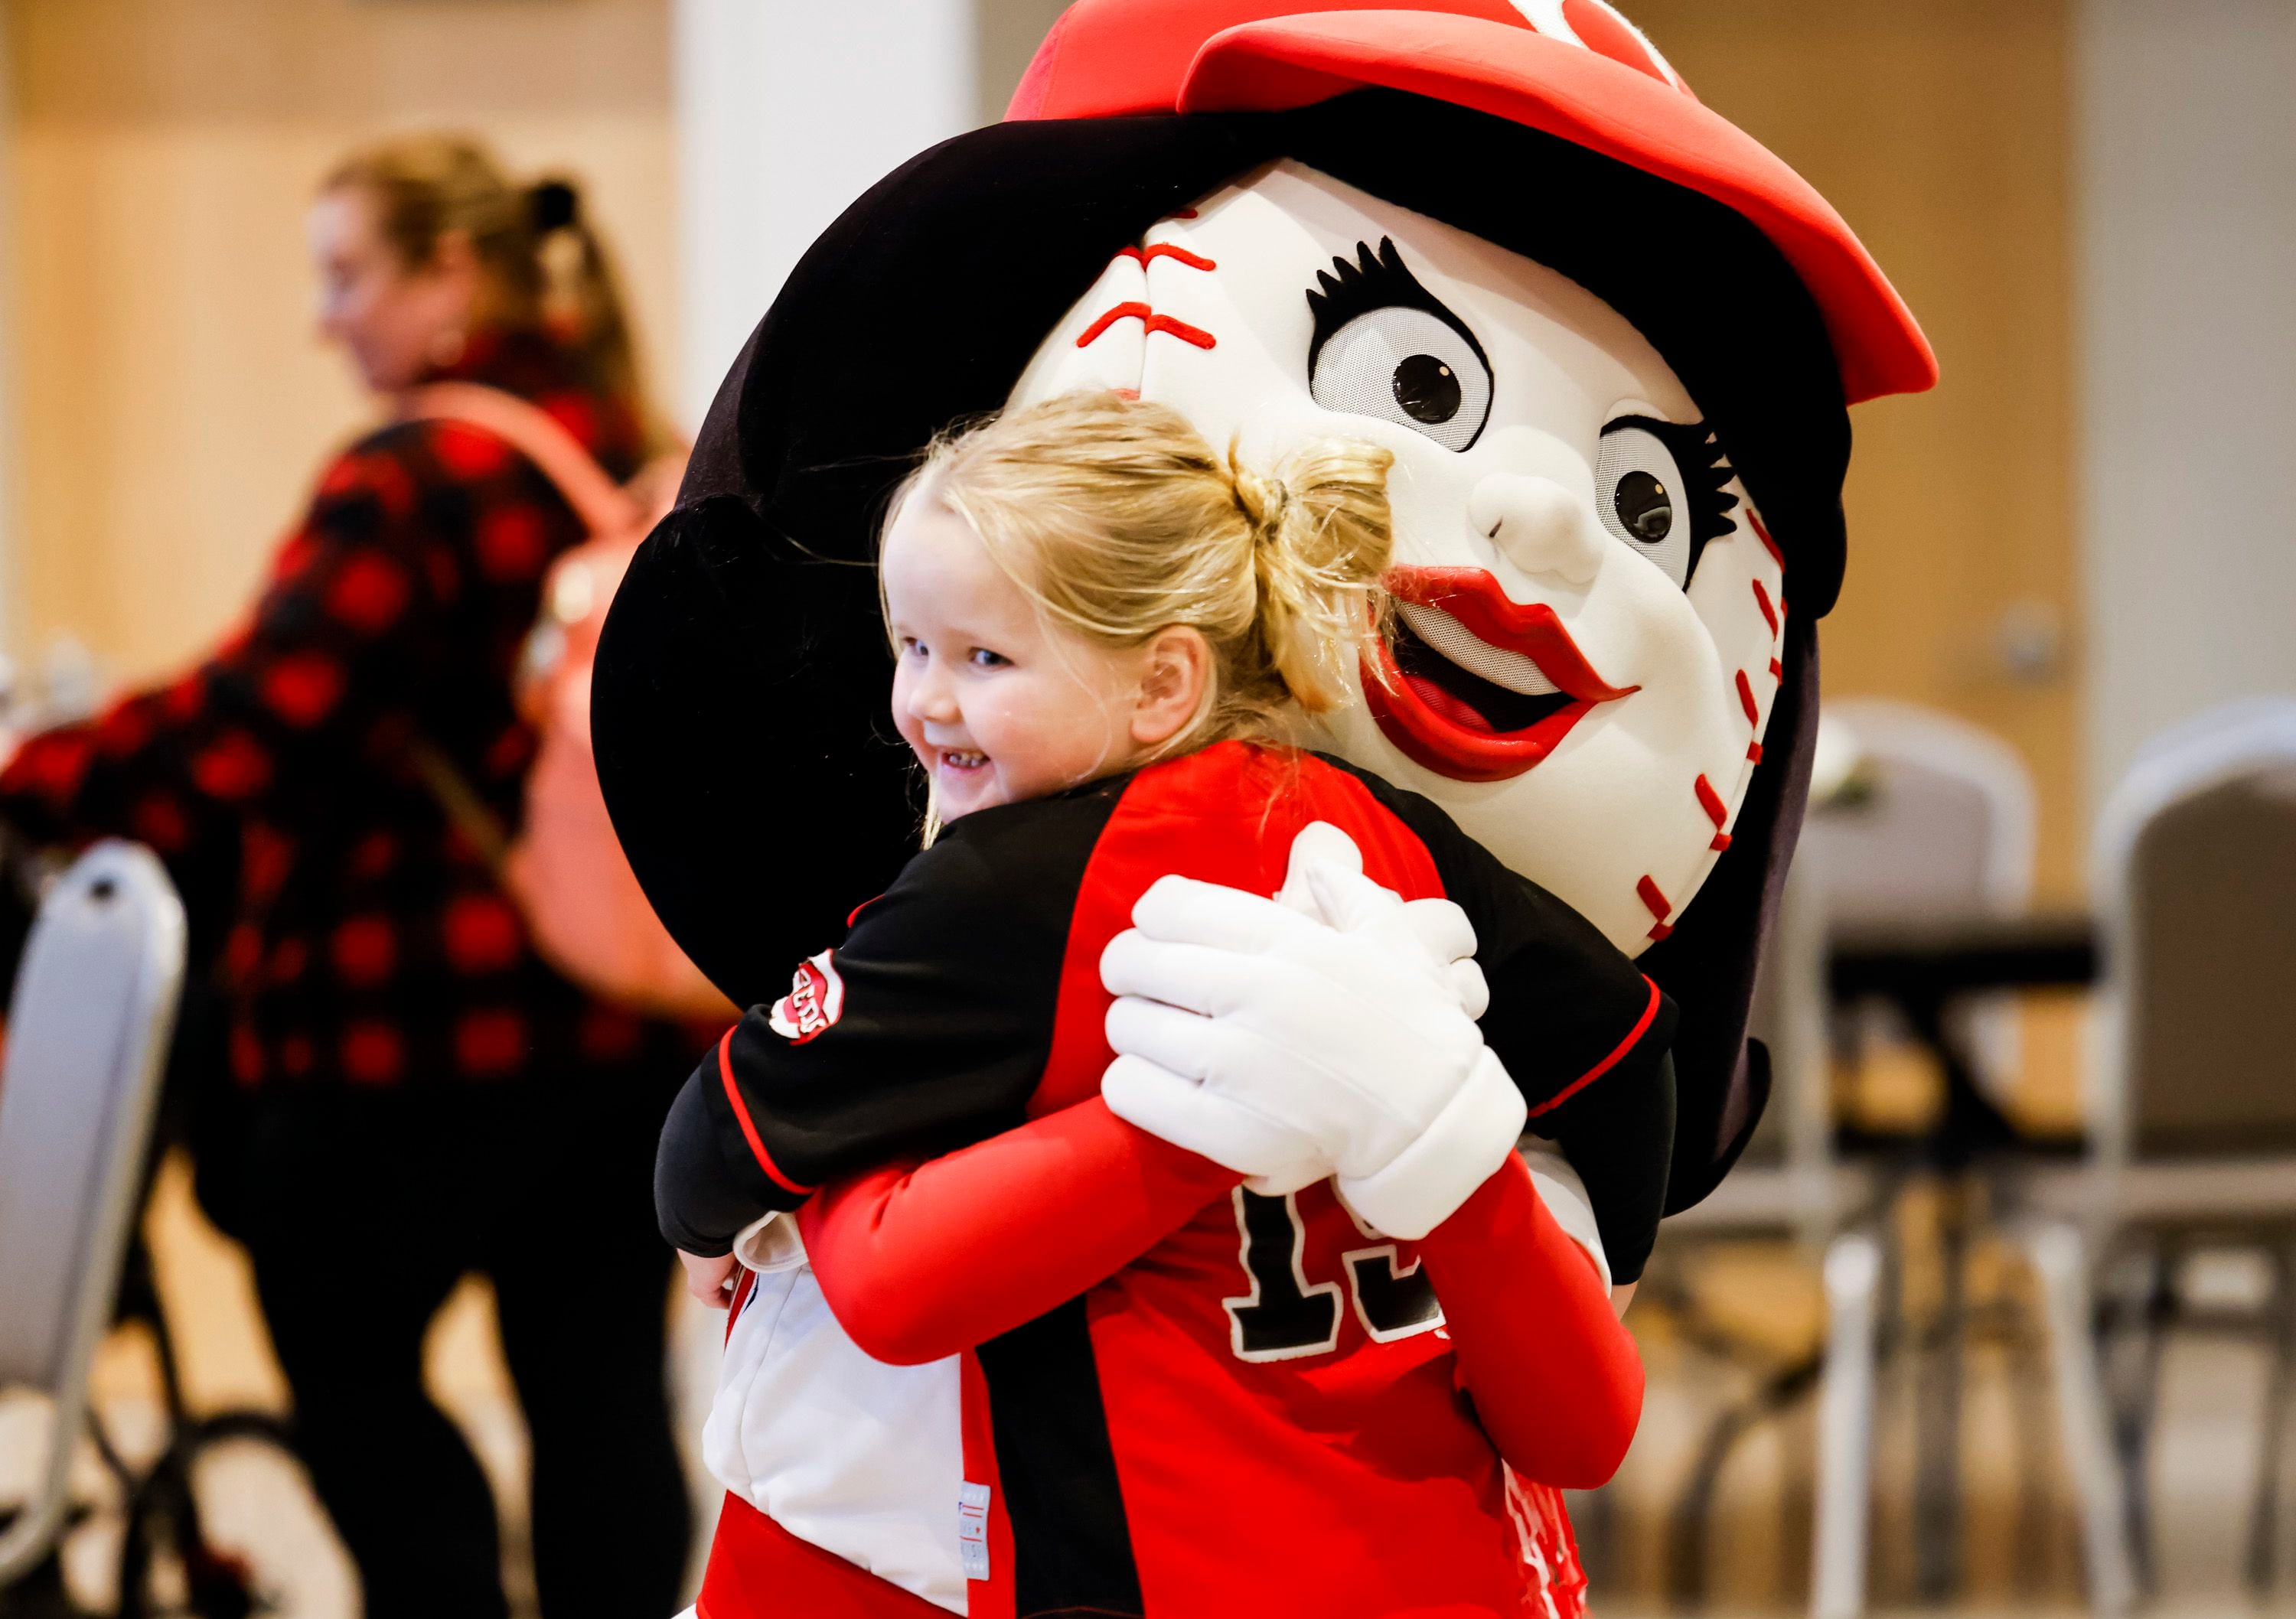 Cincinnati Reds - A hug from your favorite mascot. Day made